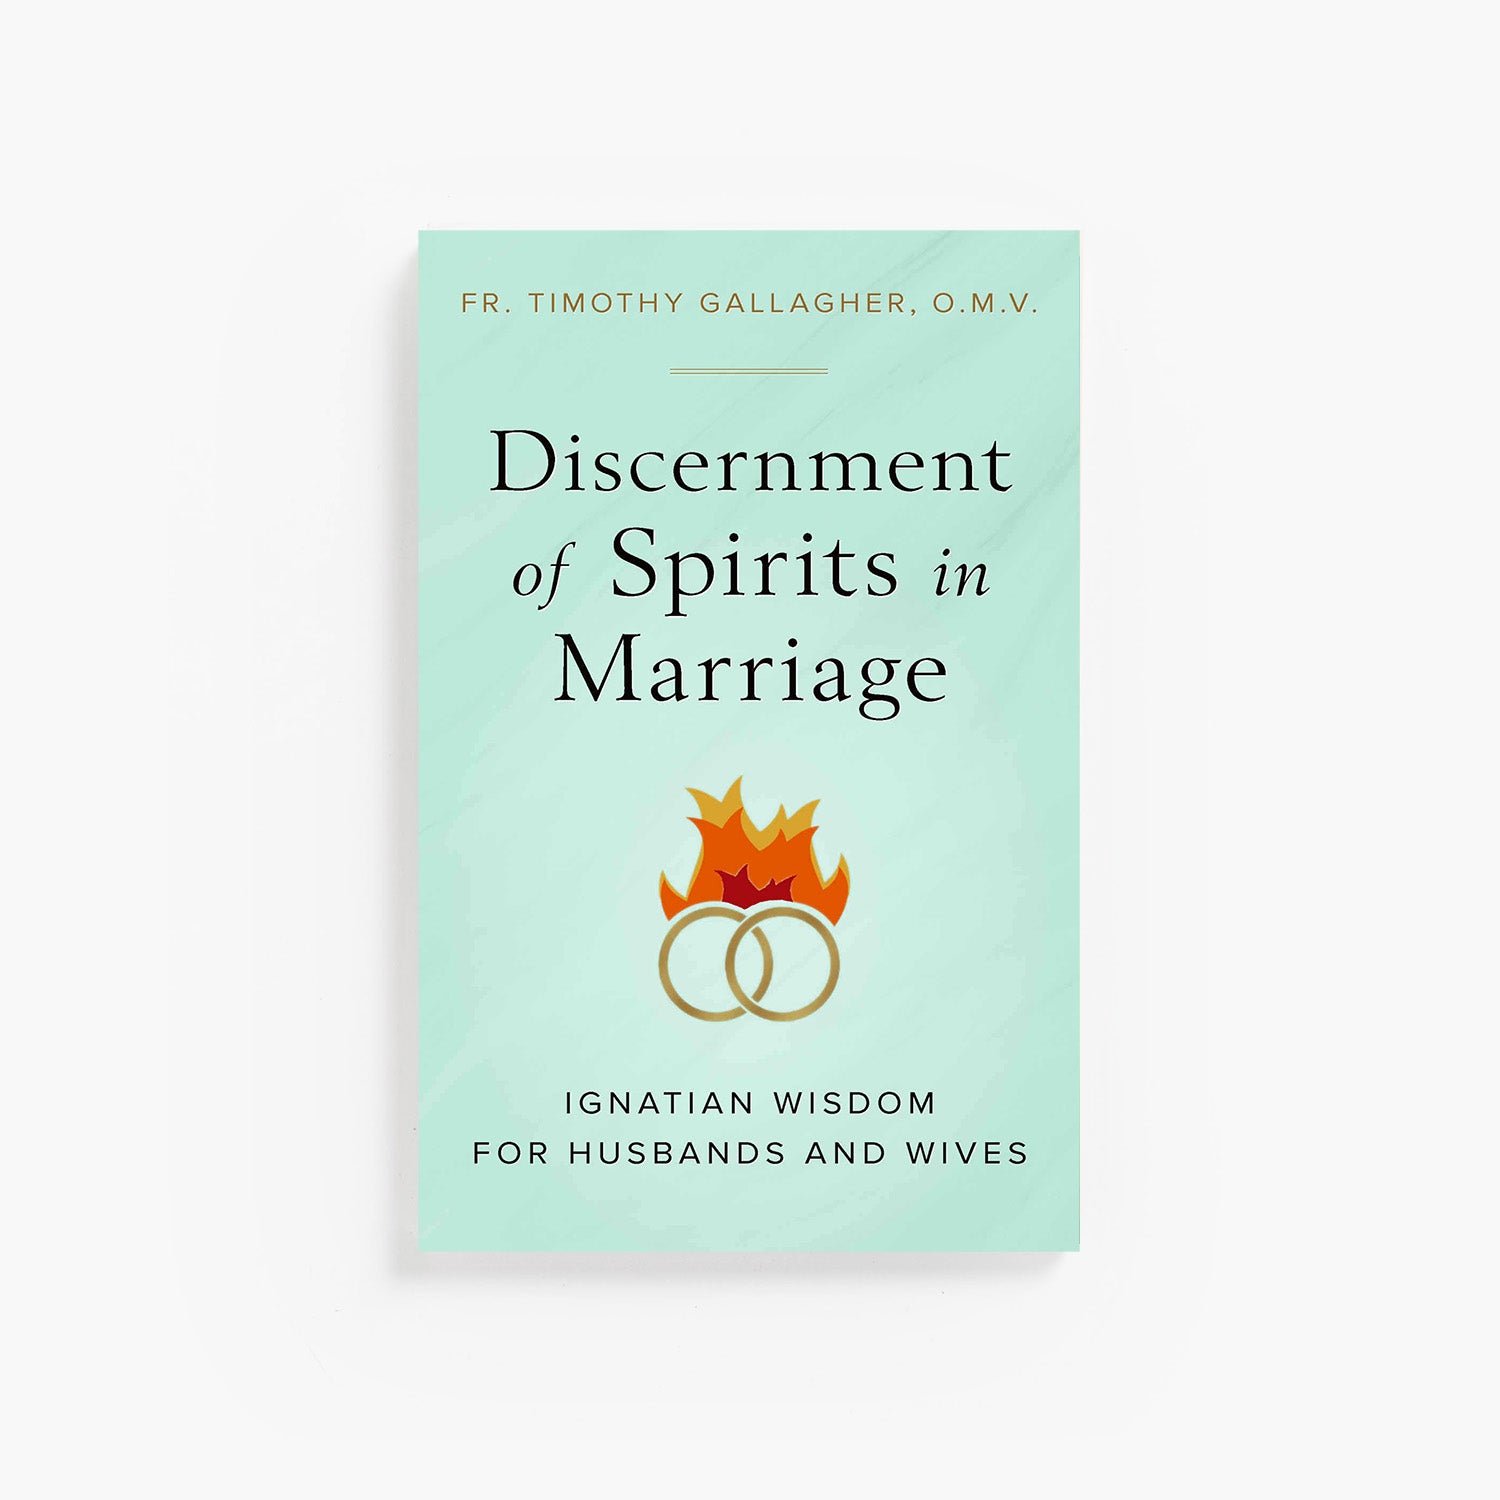 Discernment of Spirits in Marriage: Ignatian Wisdom for Husbands and Wives